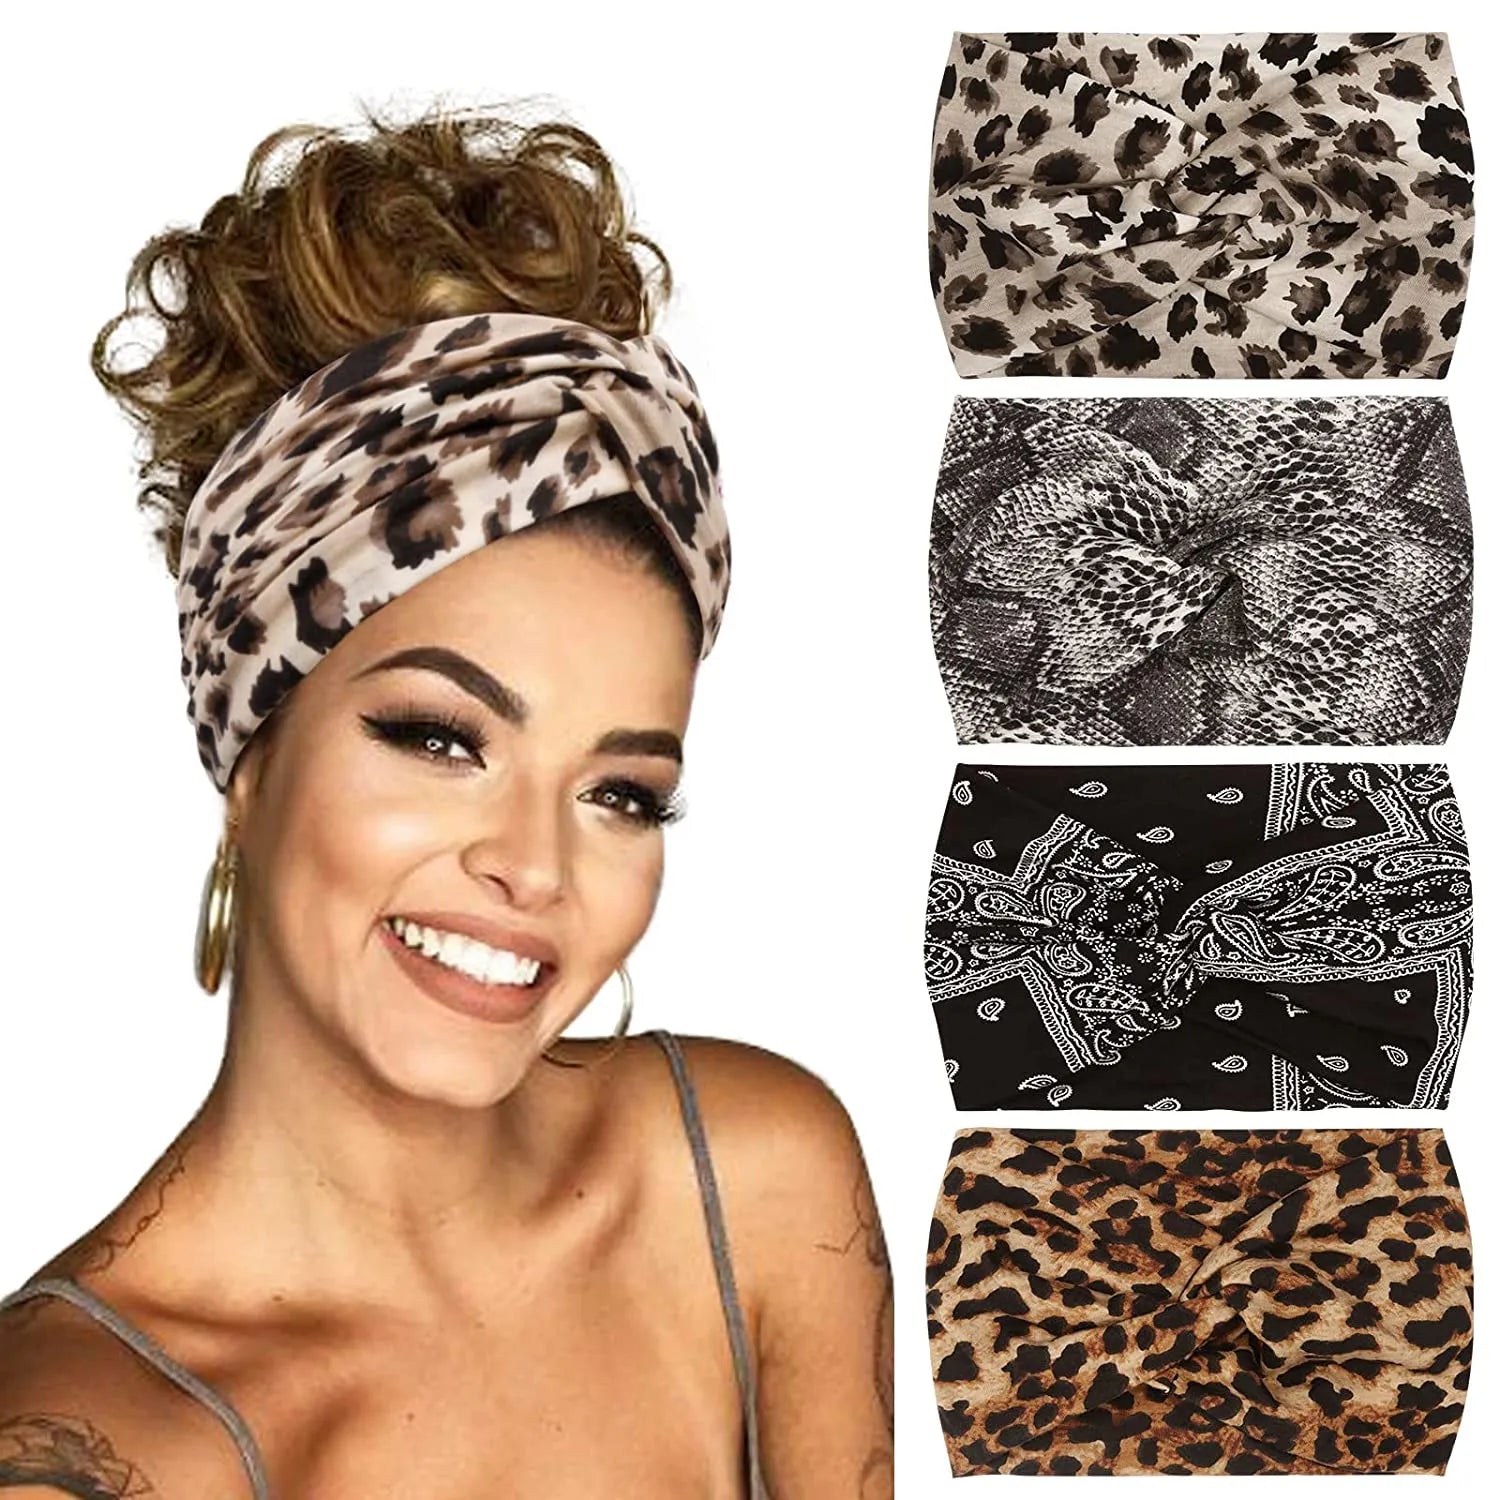 Yoga Headbands For Women's Hair Wide Thick Stretchy Boho African Turban Knotted Leopard Head Bands